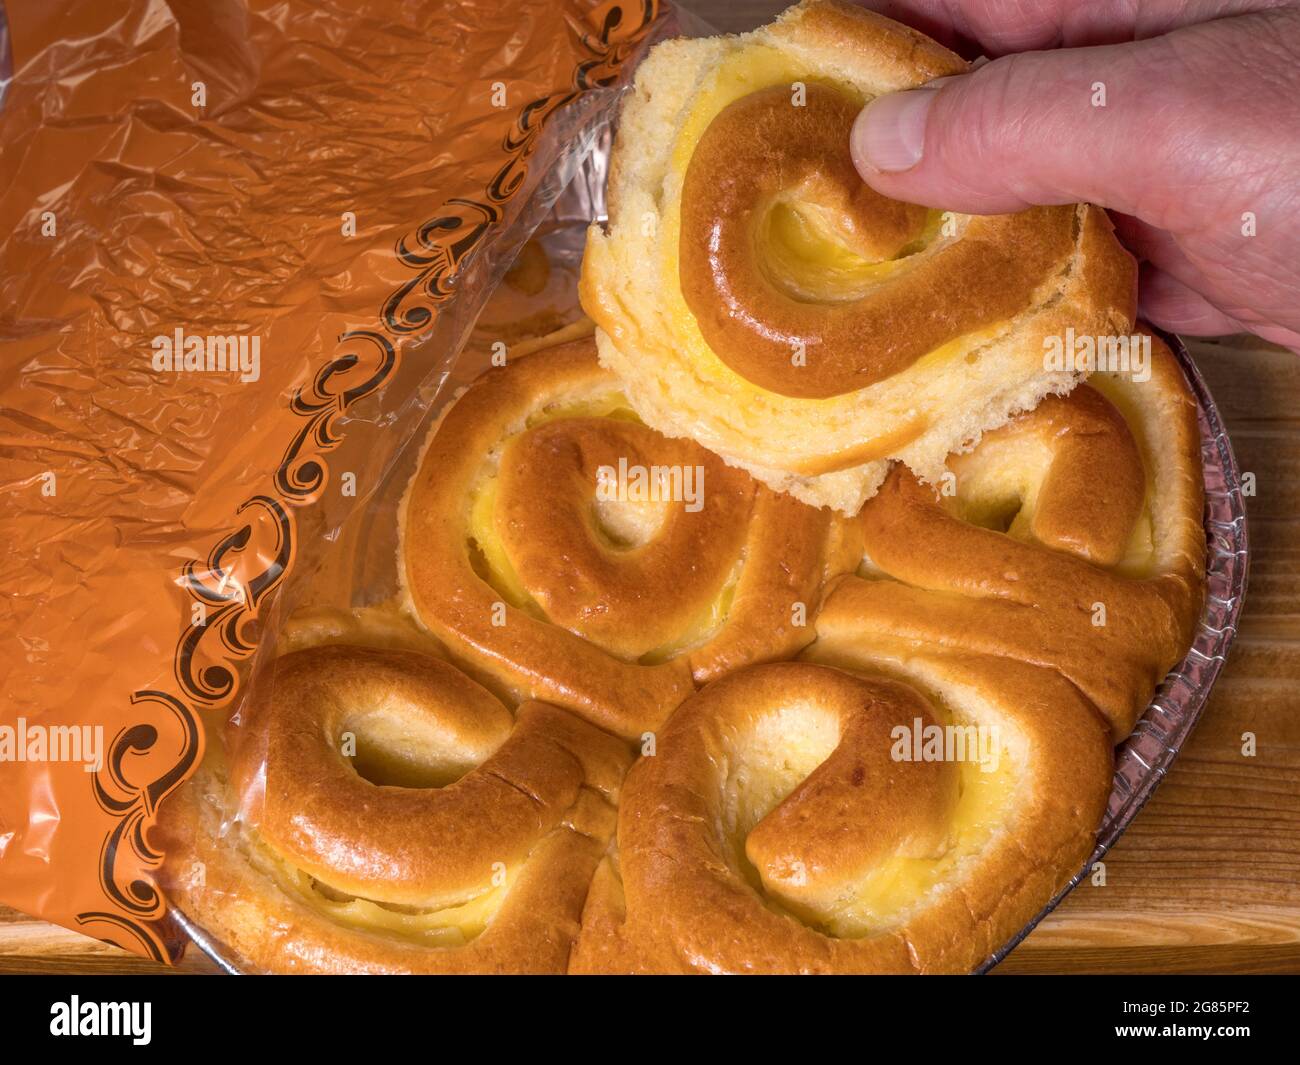 A man’s hand tearing off a piece of baked, soft, traditional French brioche bread, with a custard filling, taken from a tray in a retail packet. Stock Photo